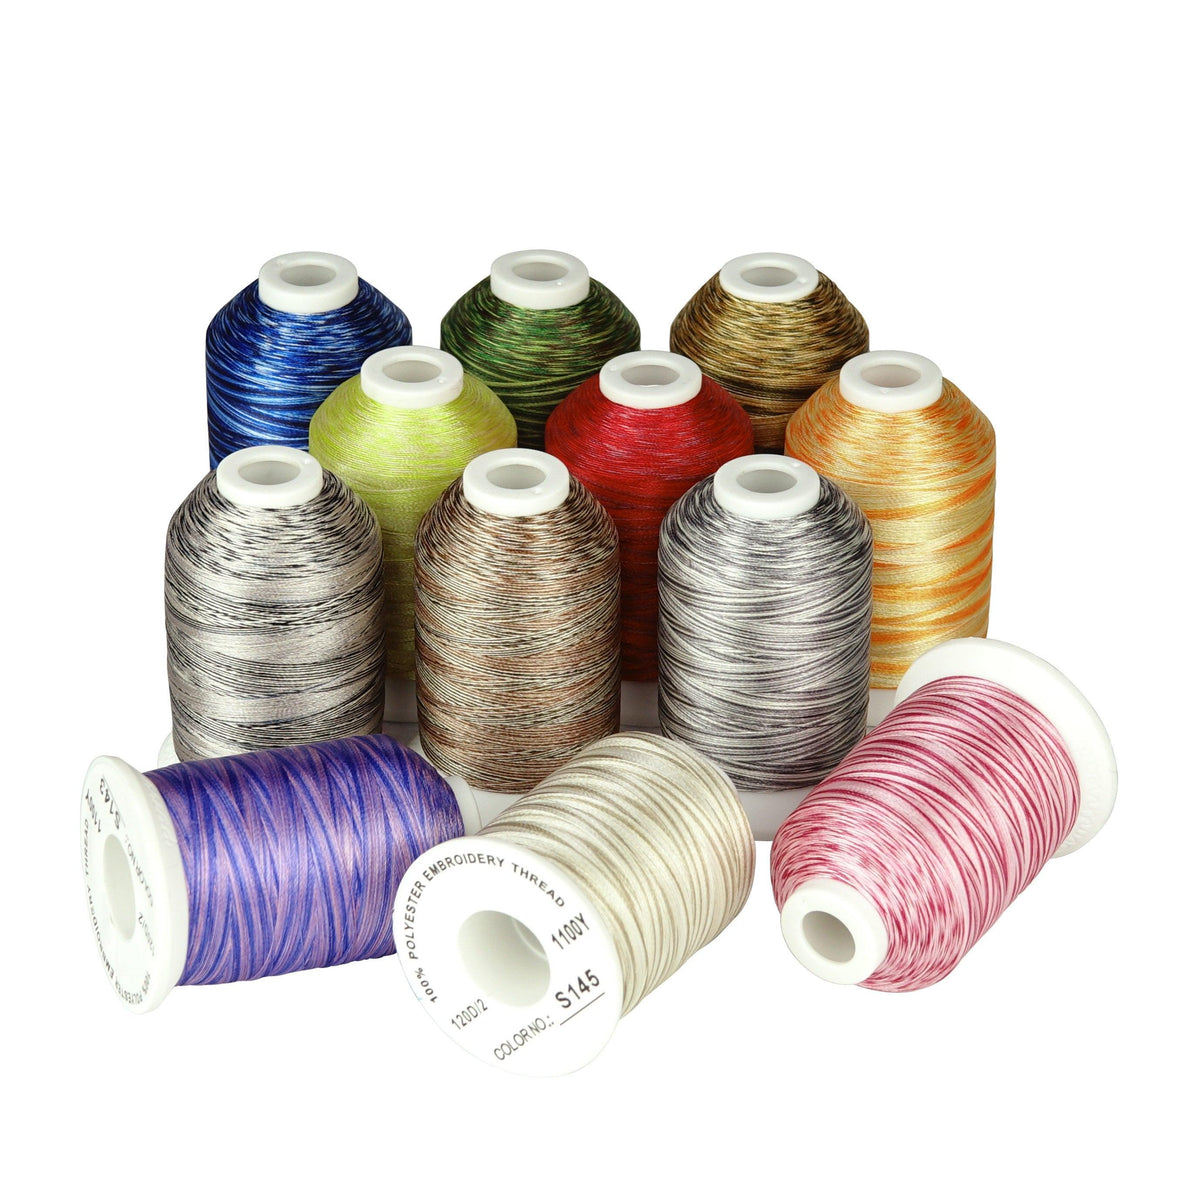  Simthread Embroidery Thread with Storage Box - 12 Options - 800  Yards/Spools, 9 Turquoise and Mint Green Colors for Embroidery and Sewing  Machine : Everything Else